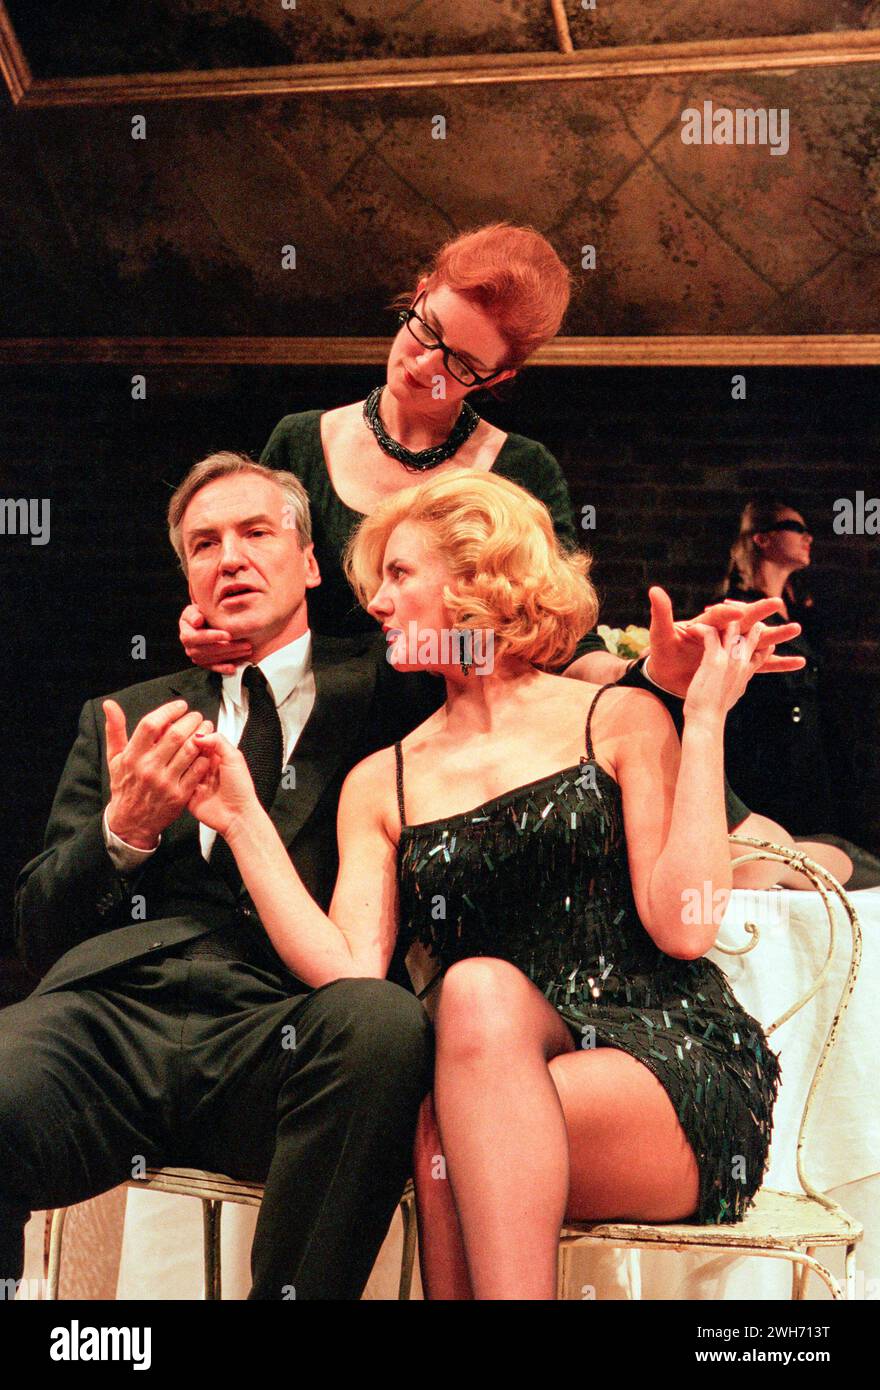 l-r: Larry Lamb (Guido Contini), Susannah Fellows (Luisa), Clare Burt (Carla) in NINE at the Donmar Warehouse, London WC2  11/12/1996  book: Arthur Kopit  music & lyrics: Maury Yeston  adapted from the Italian by Mario Fratti  design: Anthony Ward  lighting: Paul Pyant  choreographer: Jonathan Butterell  director: David Leveaux Stock Photo